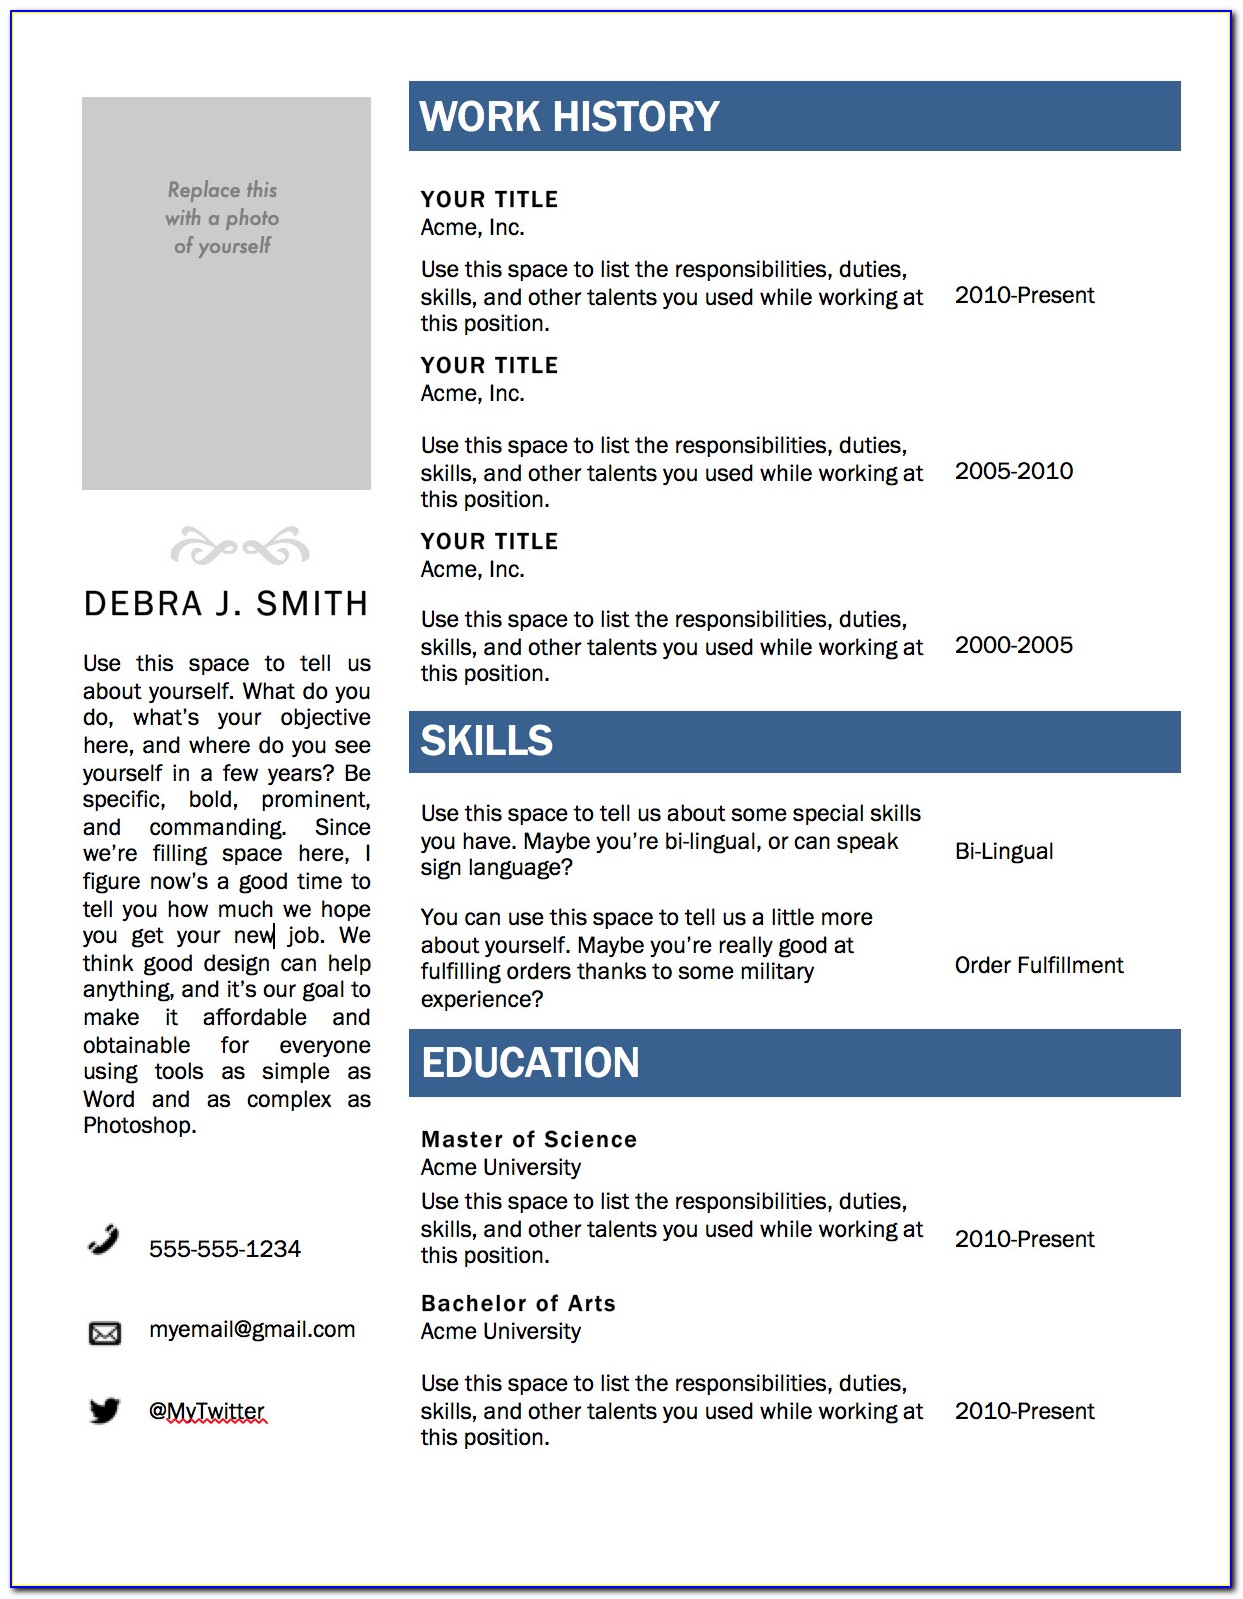 Free Creative Resume Templates Download For Microsoft Word